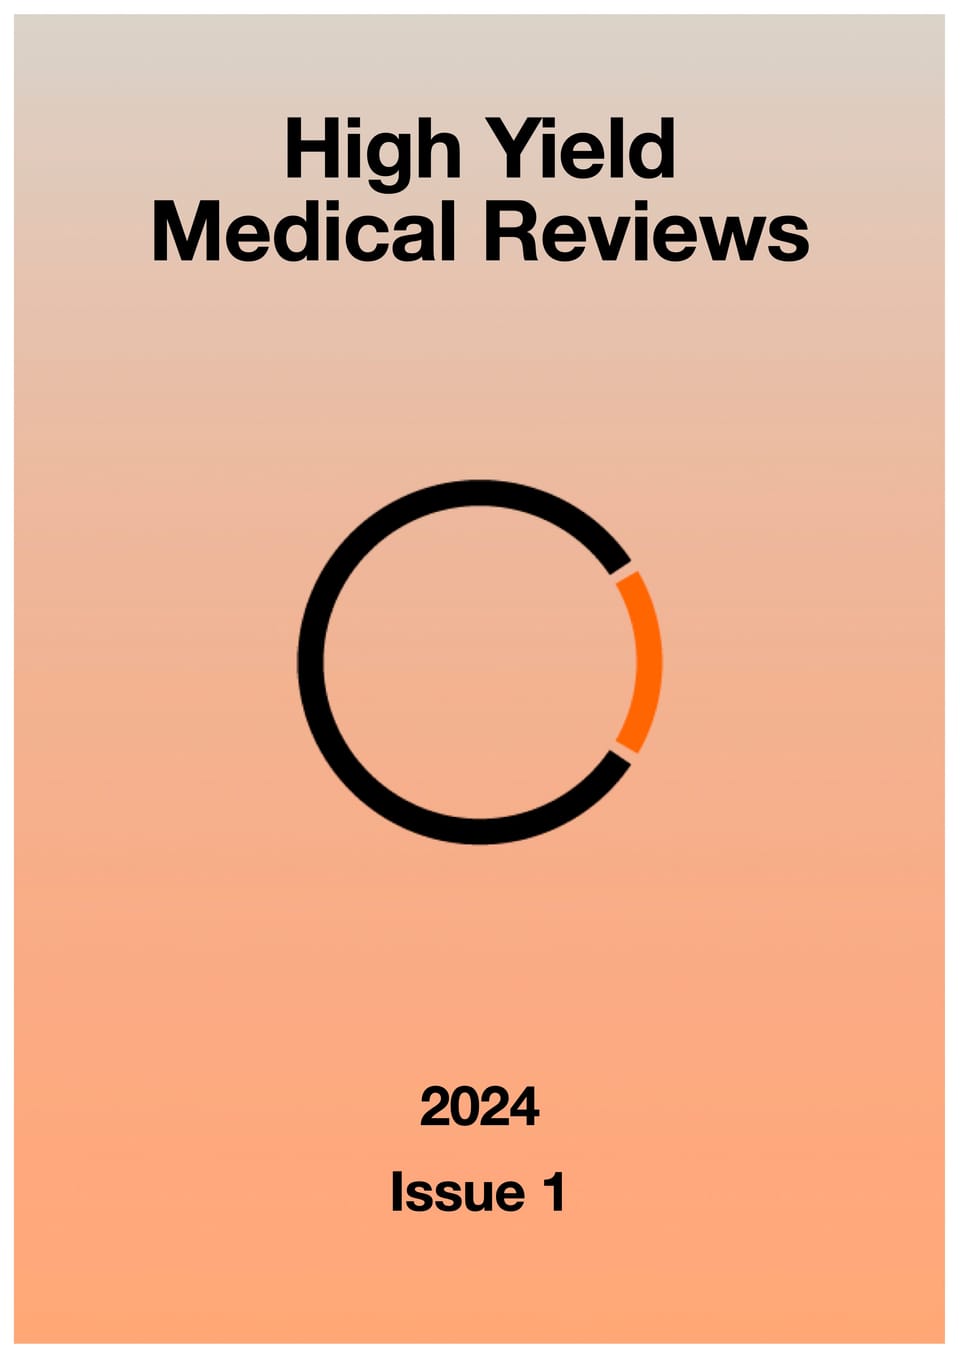 Exploring Key Medical Advances: Insights from the Latest Issue of High Yield Medical Reviews